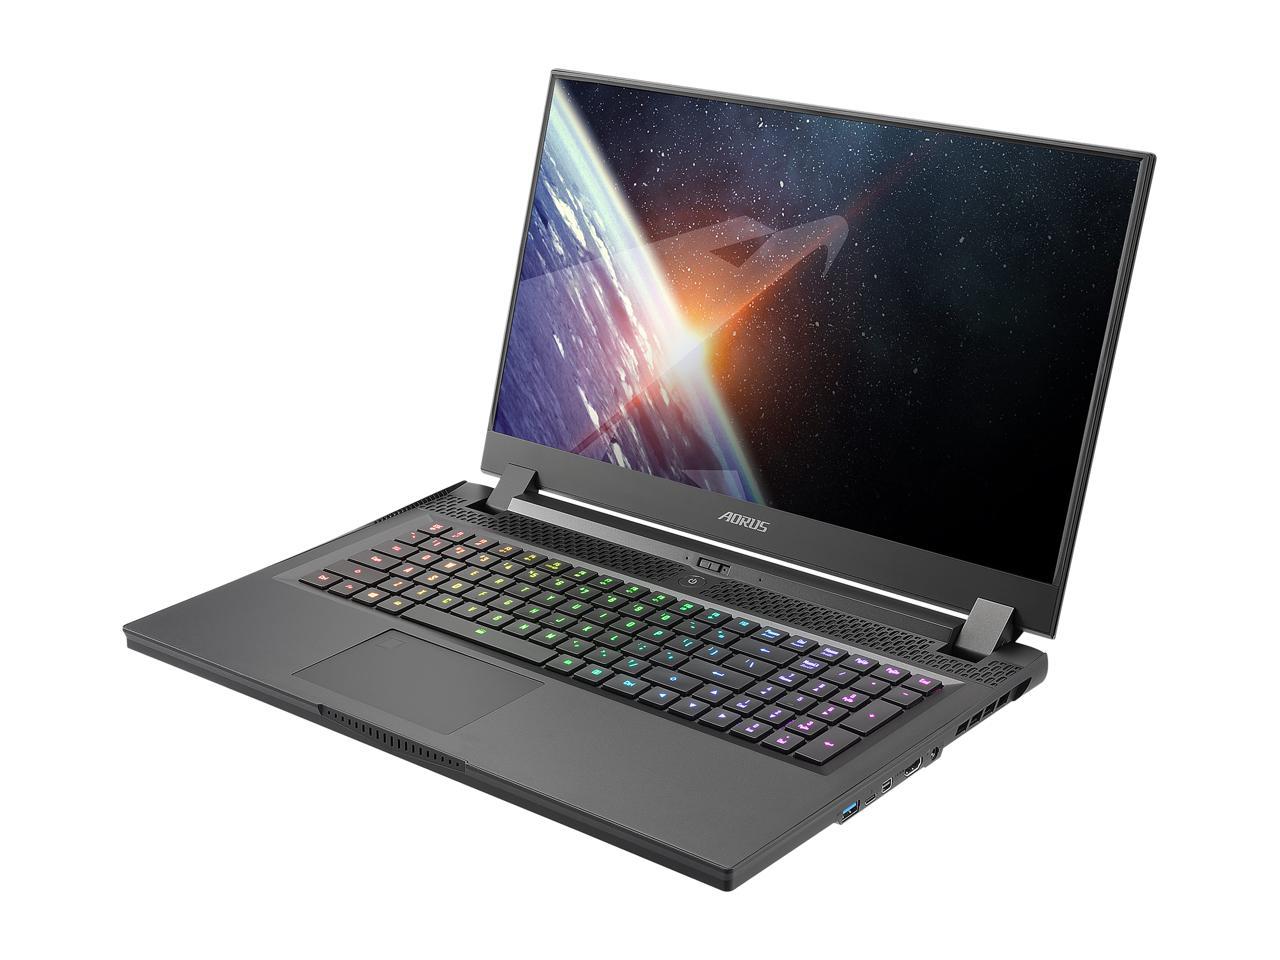 Deal | Gigabyte AORUS 17G YD gaming laptop with RTX 3080, Core i7-11800H, 32GB RAM and 300 Hz display now on sale for US$1699 - Notebookcheck.net